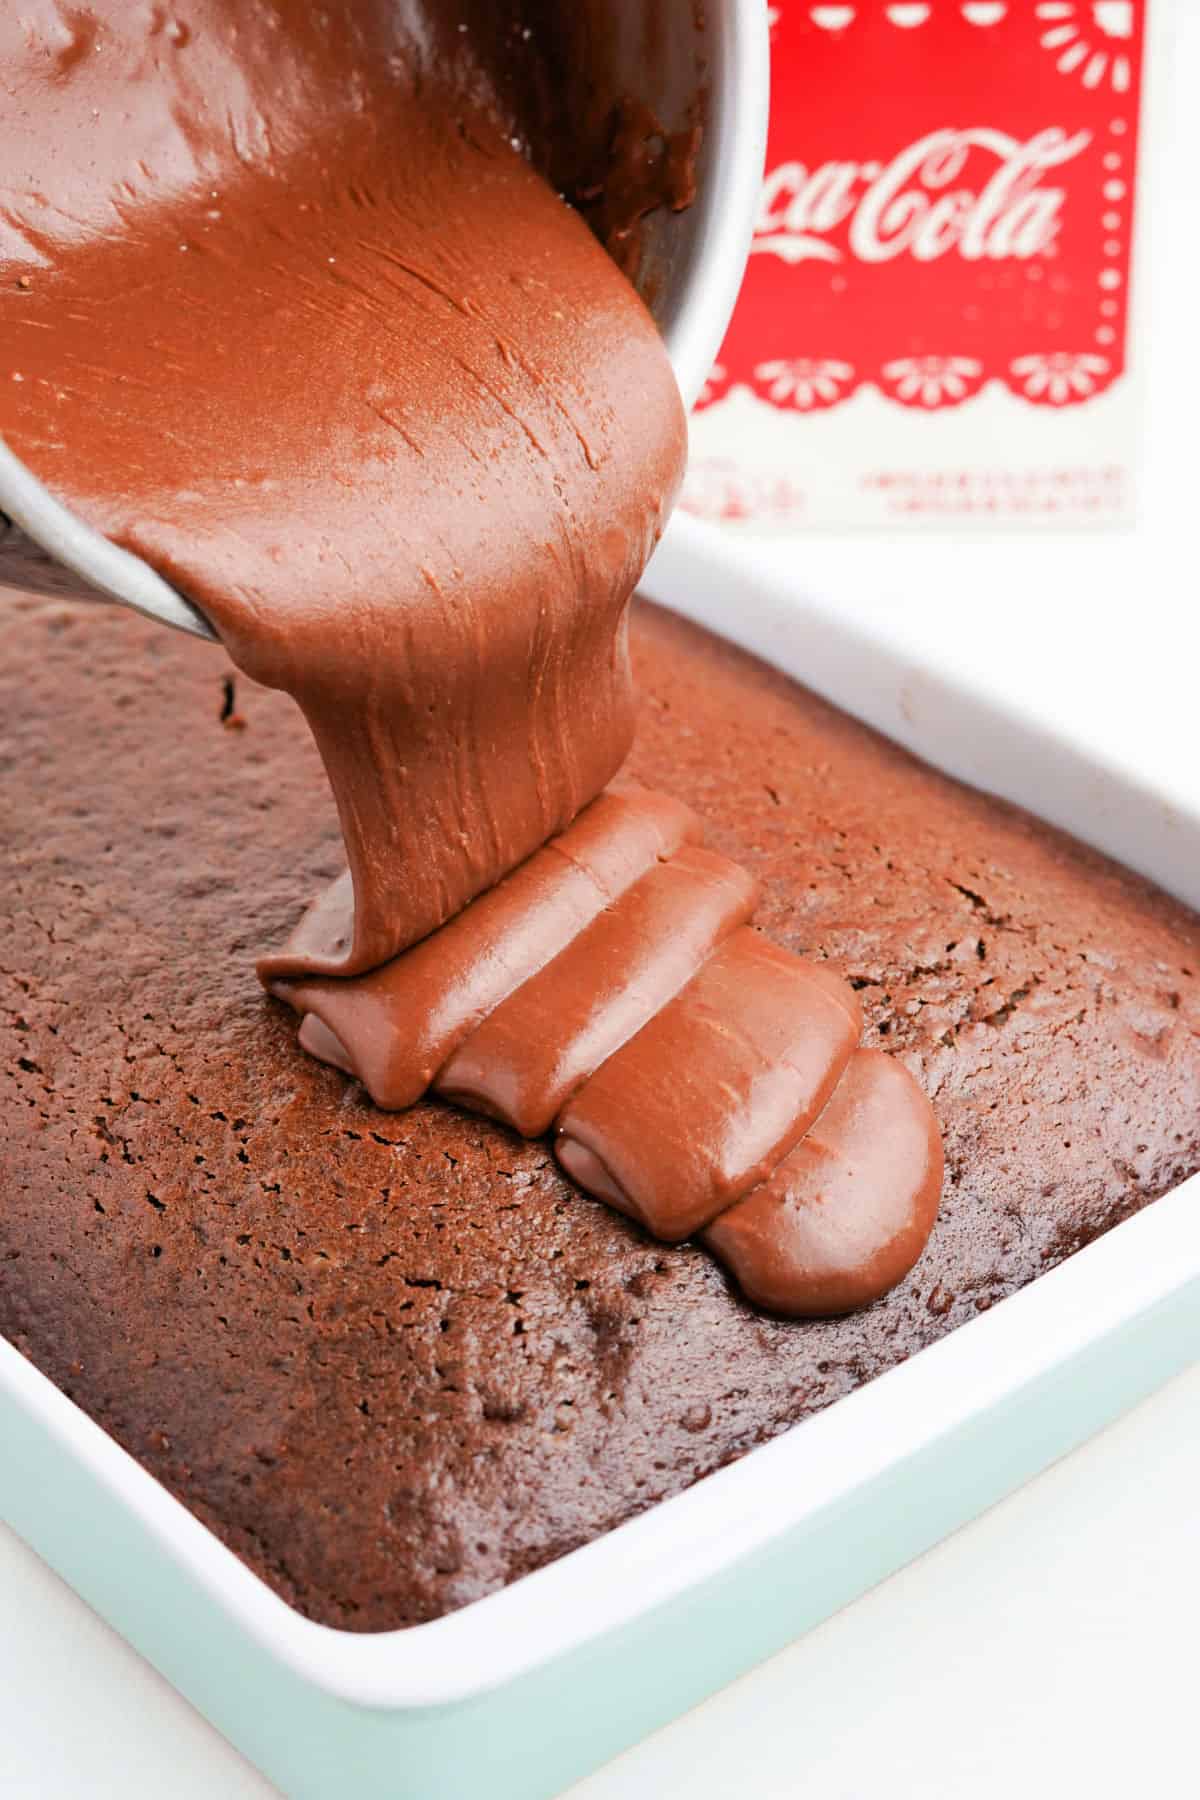 Chocolate frosting being poured over a chocolate cake in a 13x9 pan.